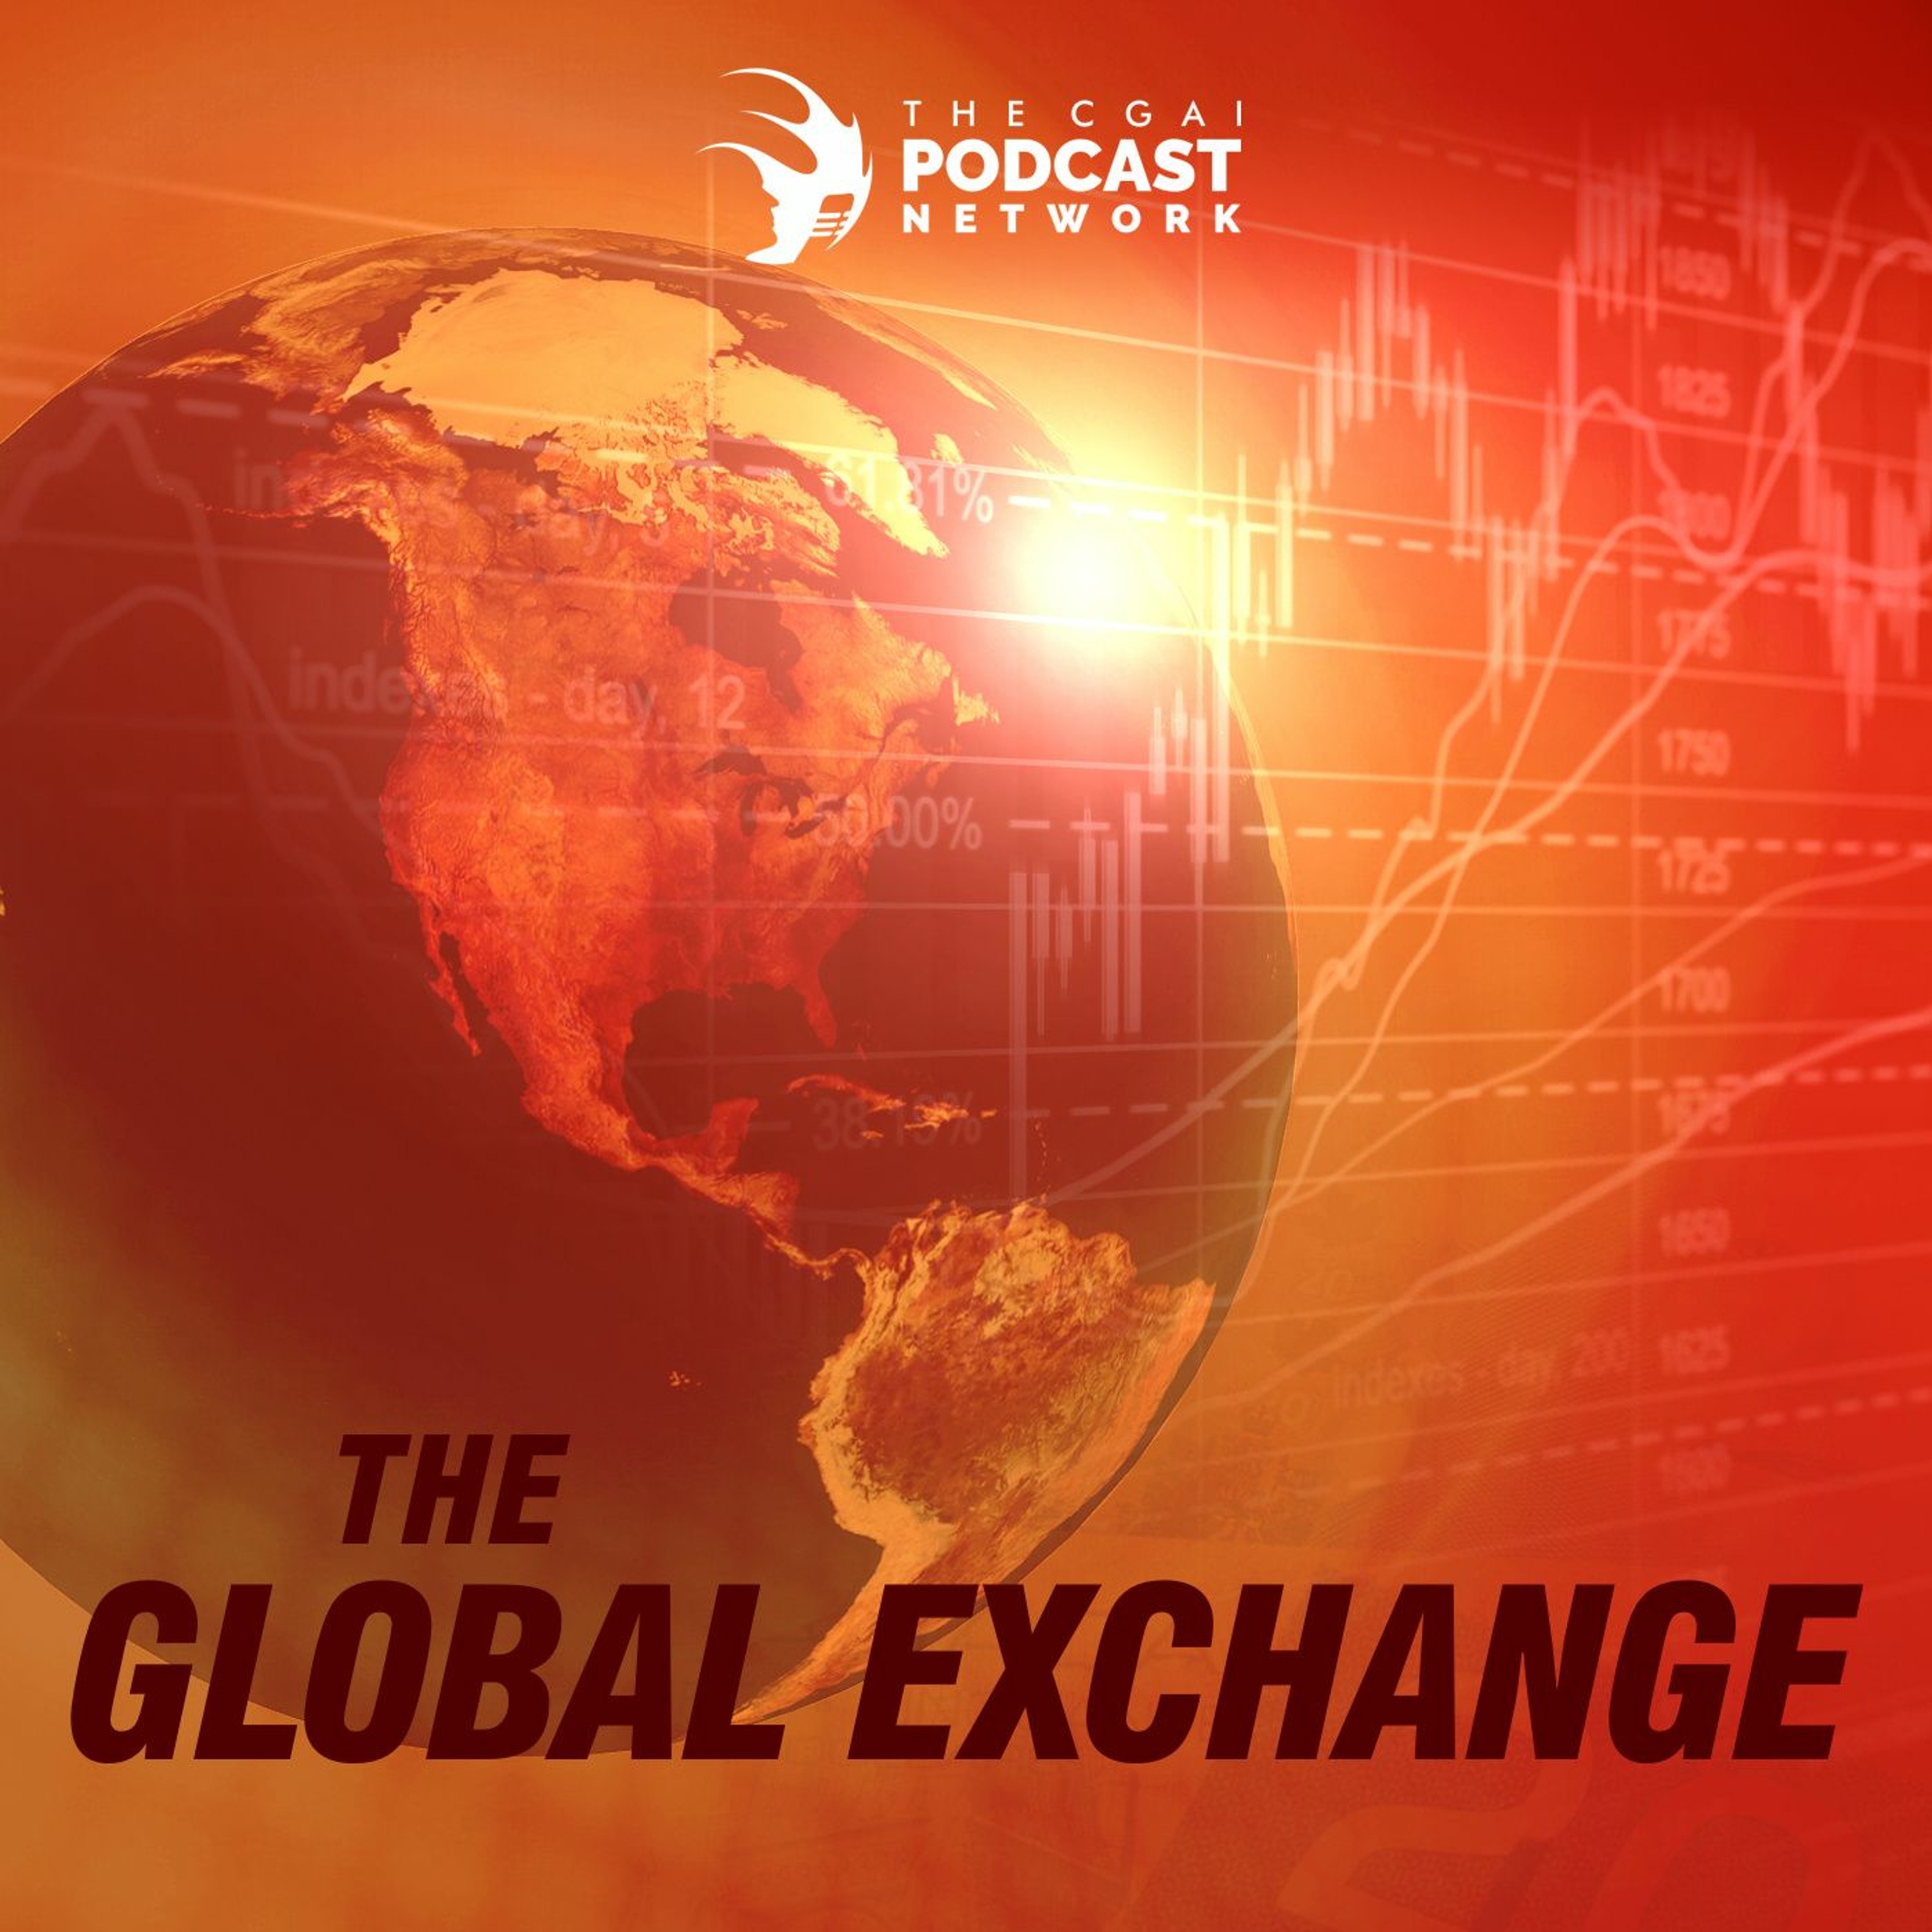 The Global Exchange: International Development in the Federal Budget